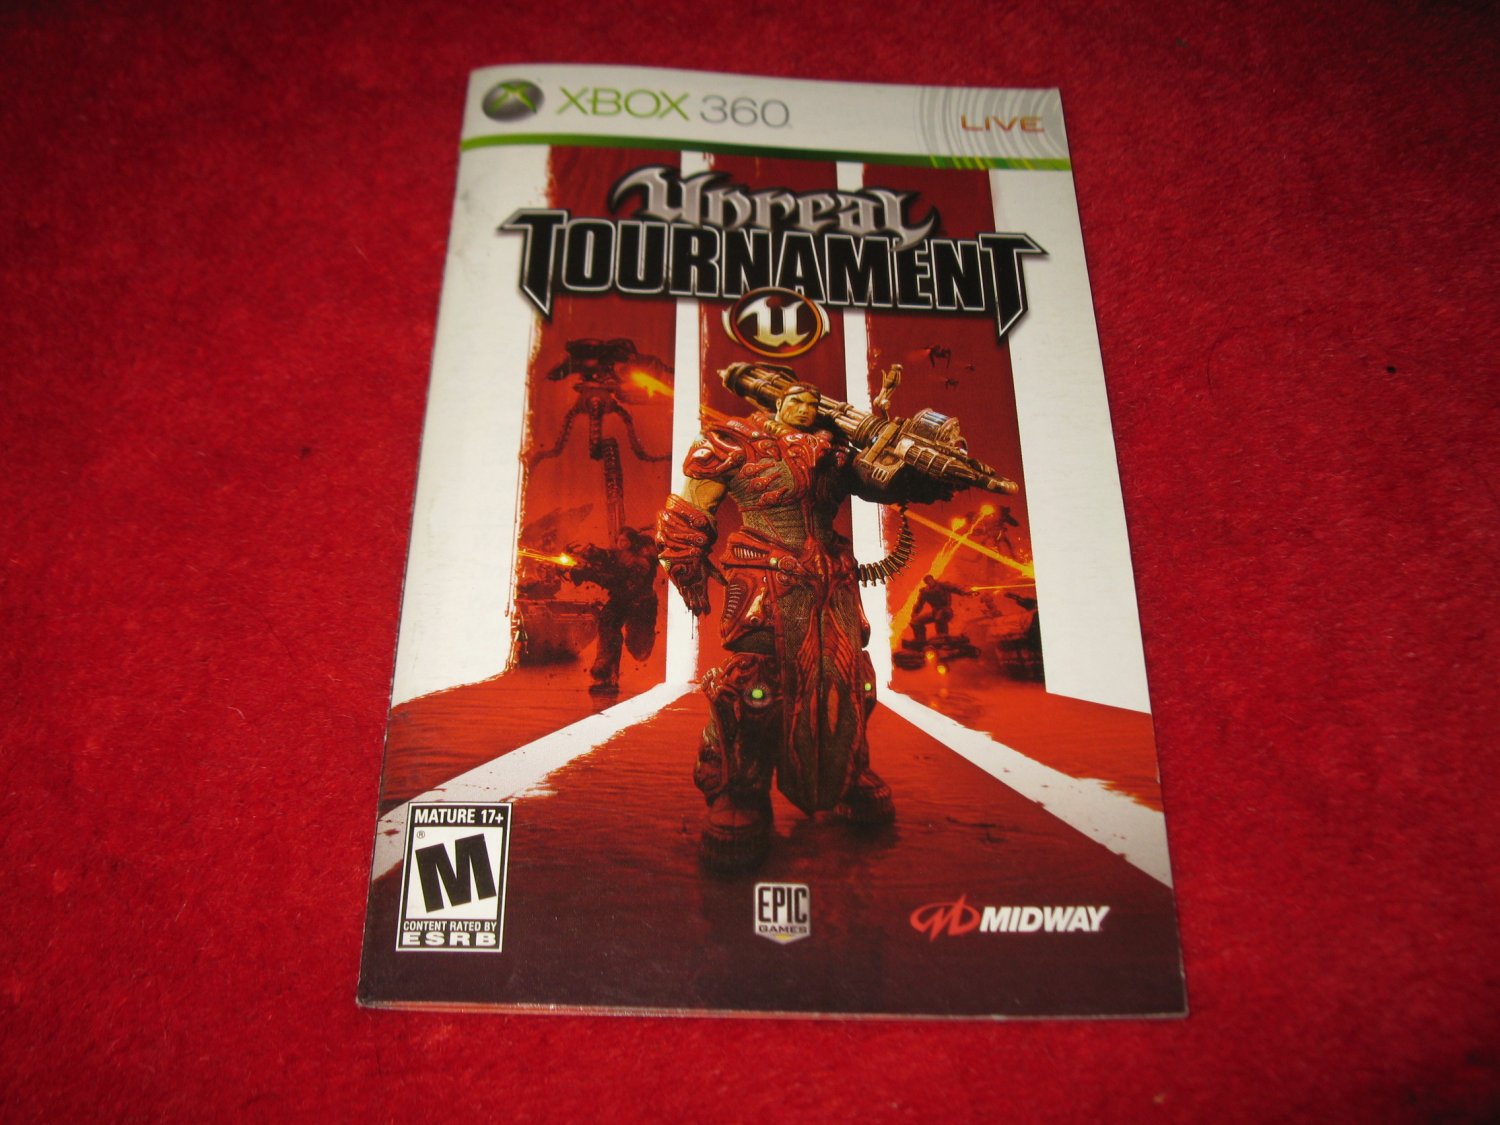 Unreal Tournament : Xbox 360 Video Game Instruction Booklet